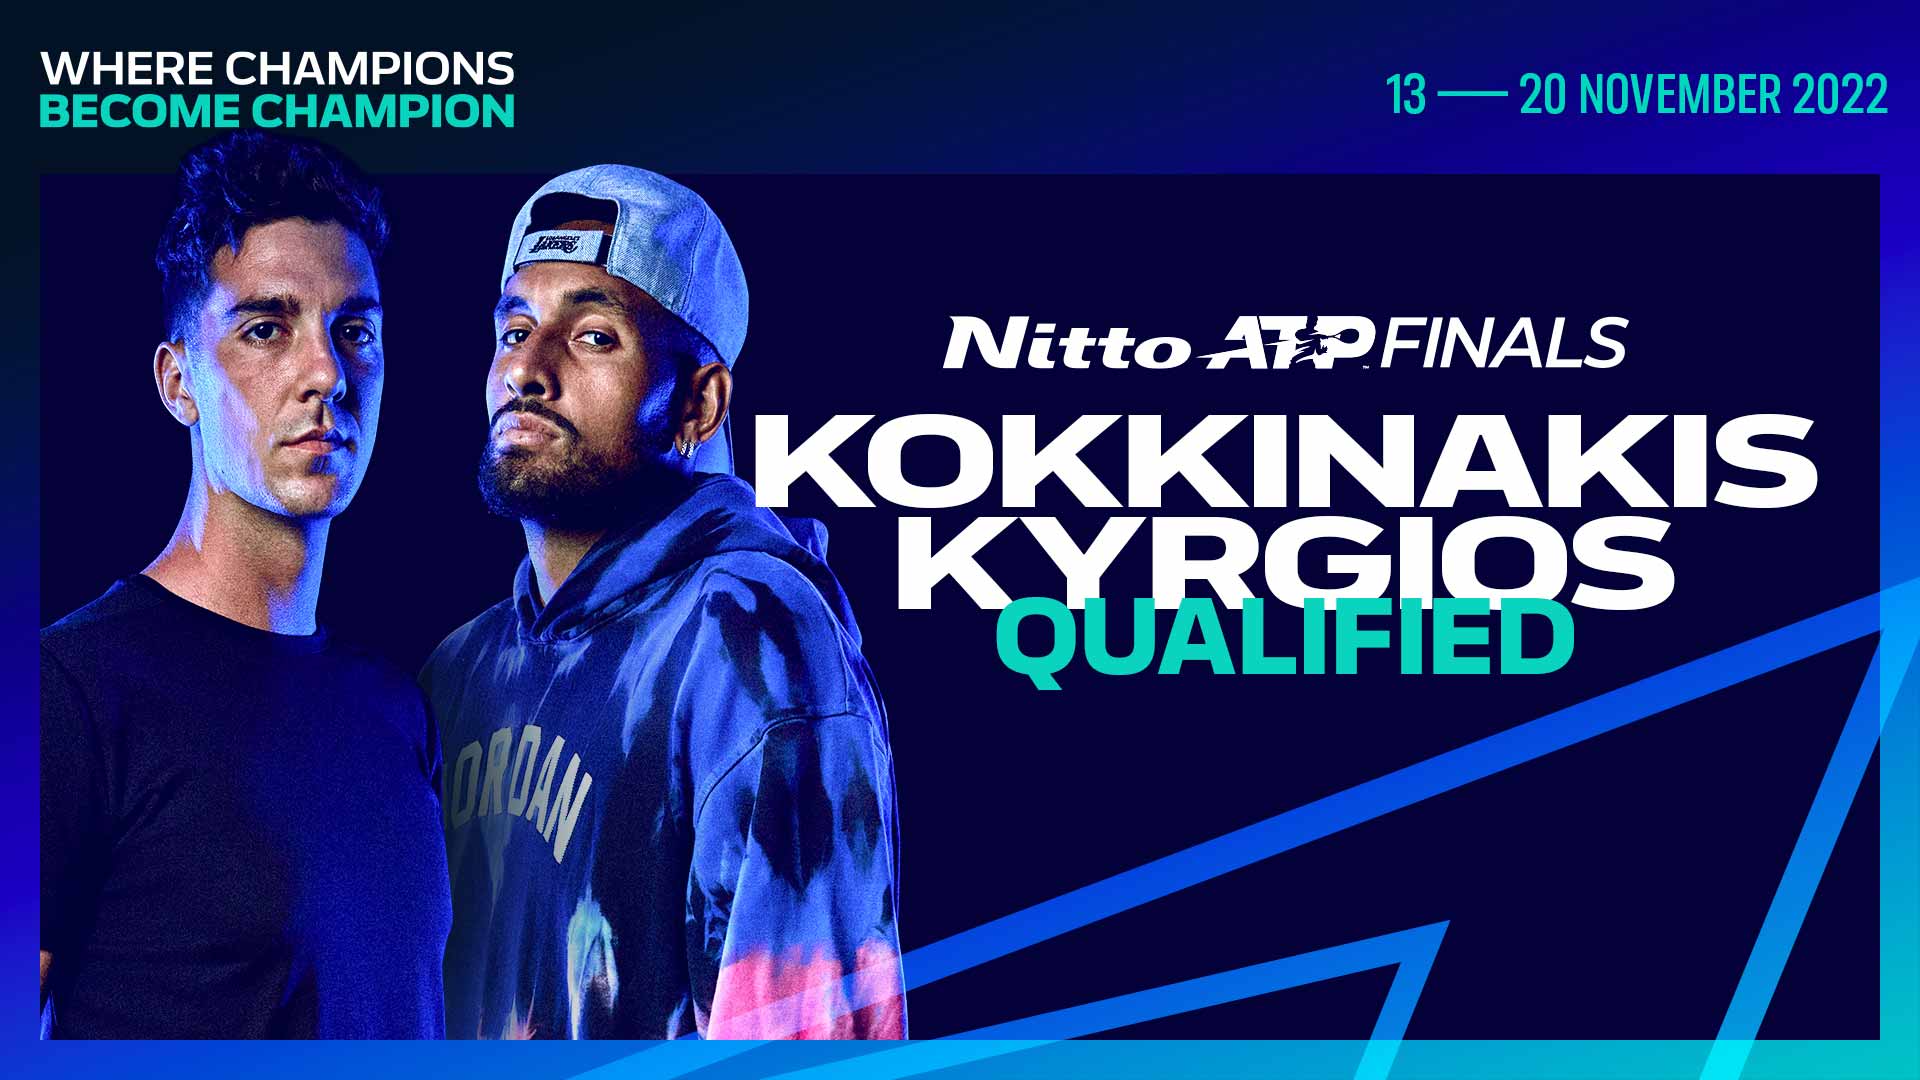 Thanasi Kokkinakis and Nick Kyrgios will compete in Turin from 13-20 November.